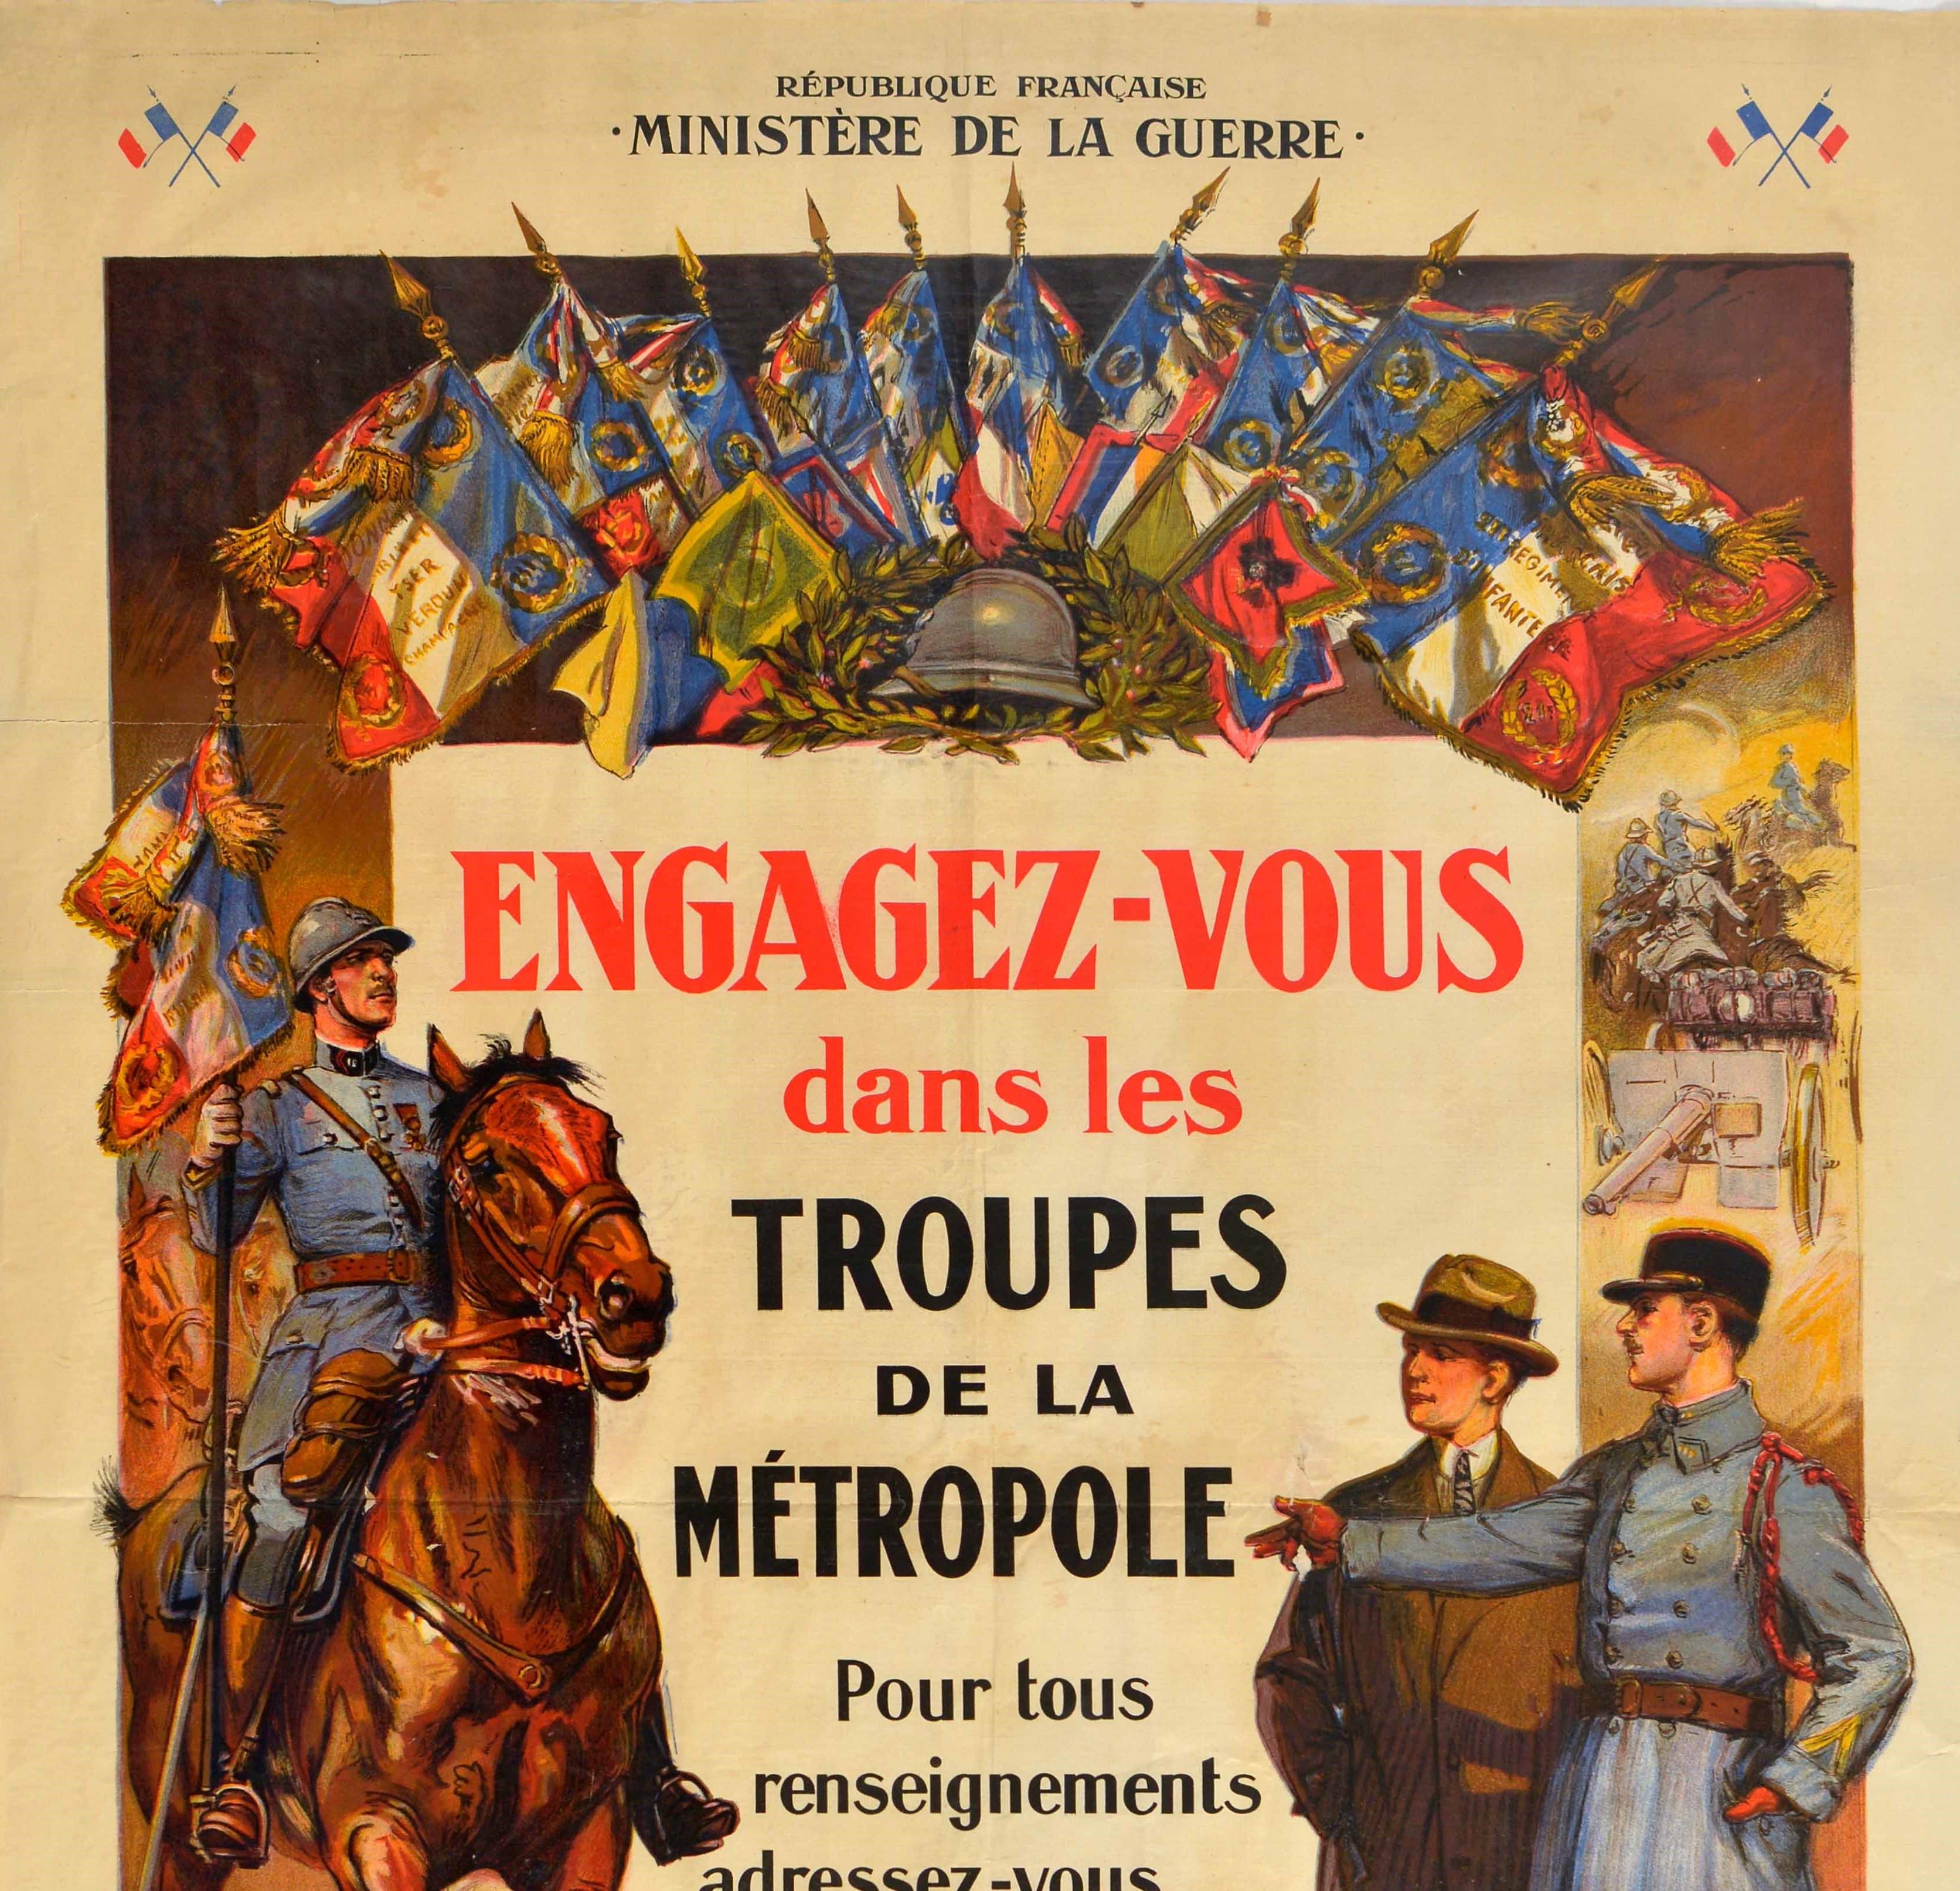 Original vintage French military recruitment poster issued by the French Republic Ministry of War - Join the metropole troops / Engagez-vous dans les Troupes de la Metropole - featuring artwork by the French painter Maurice Toussaint (1882-1974)